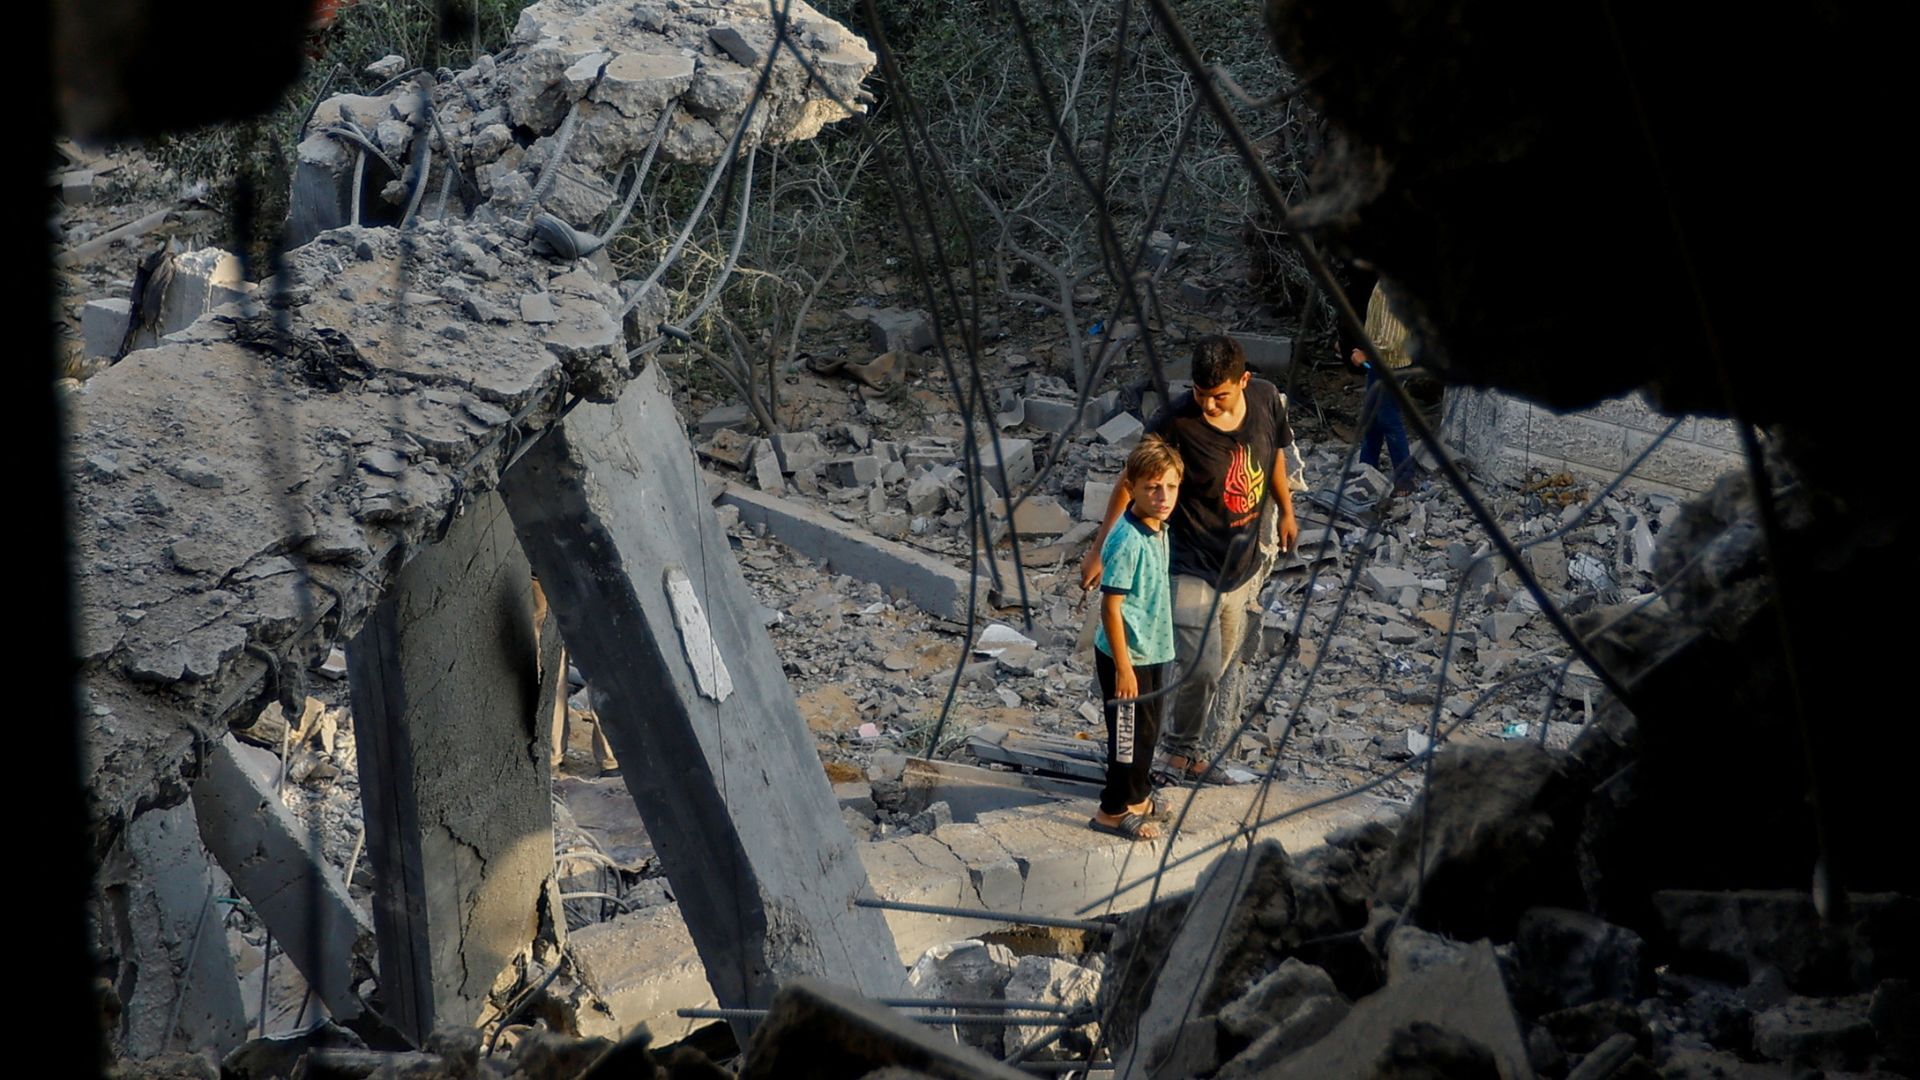 Is Israel violating the laws of war meant to protect children? thumbnail